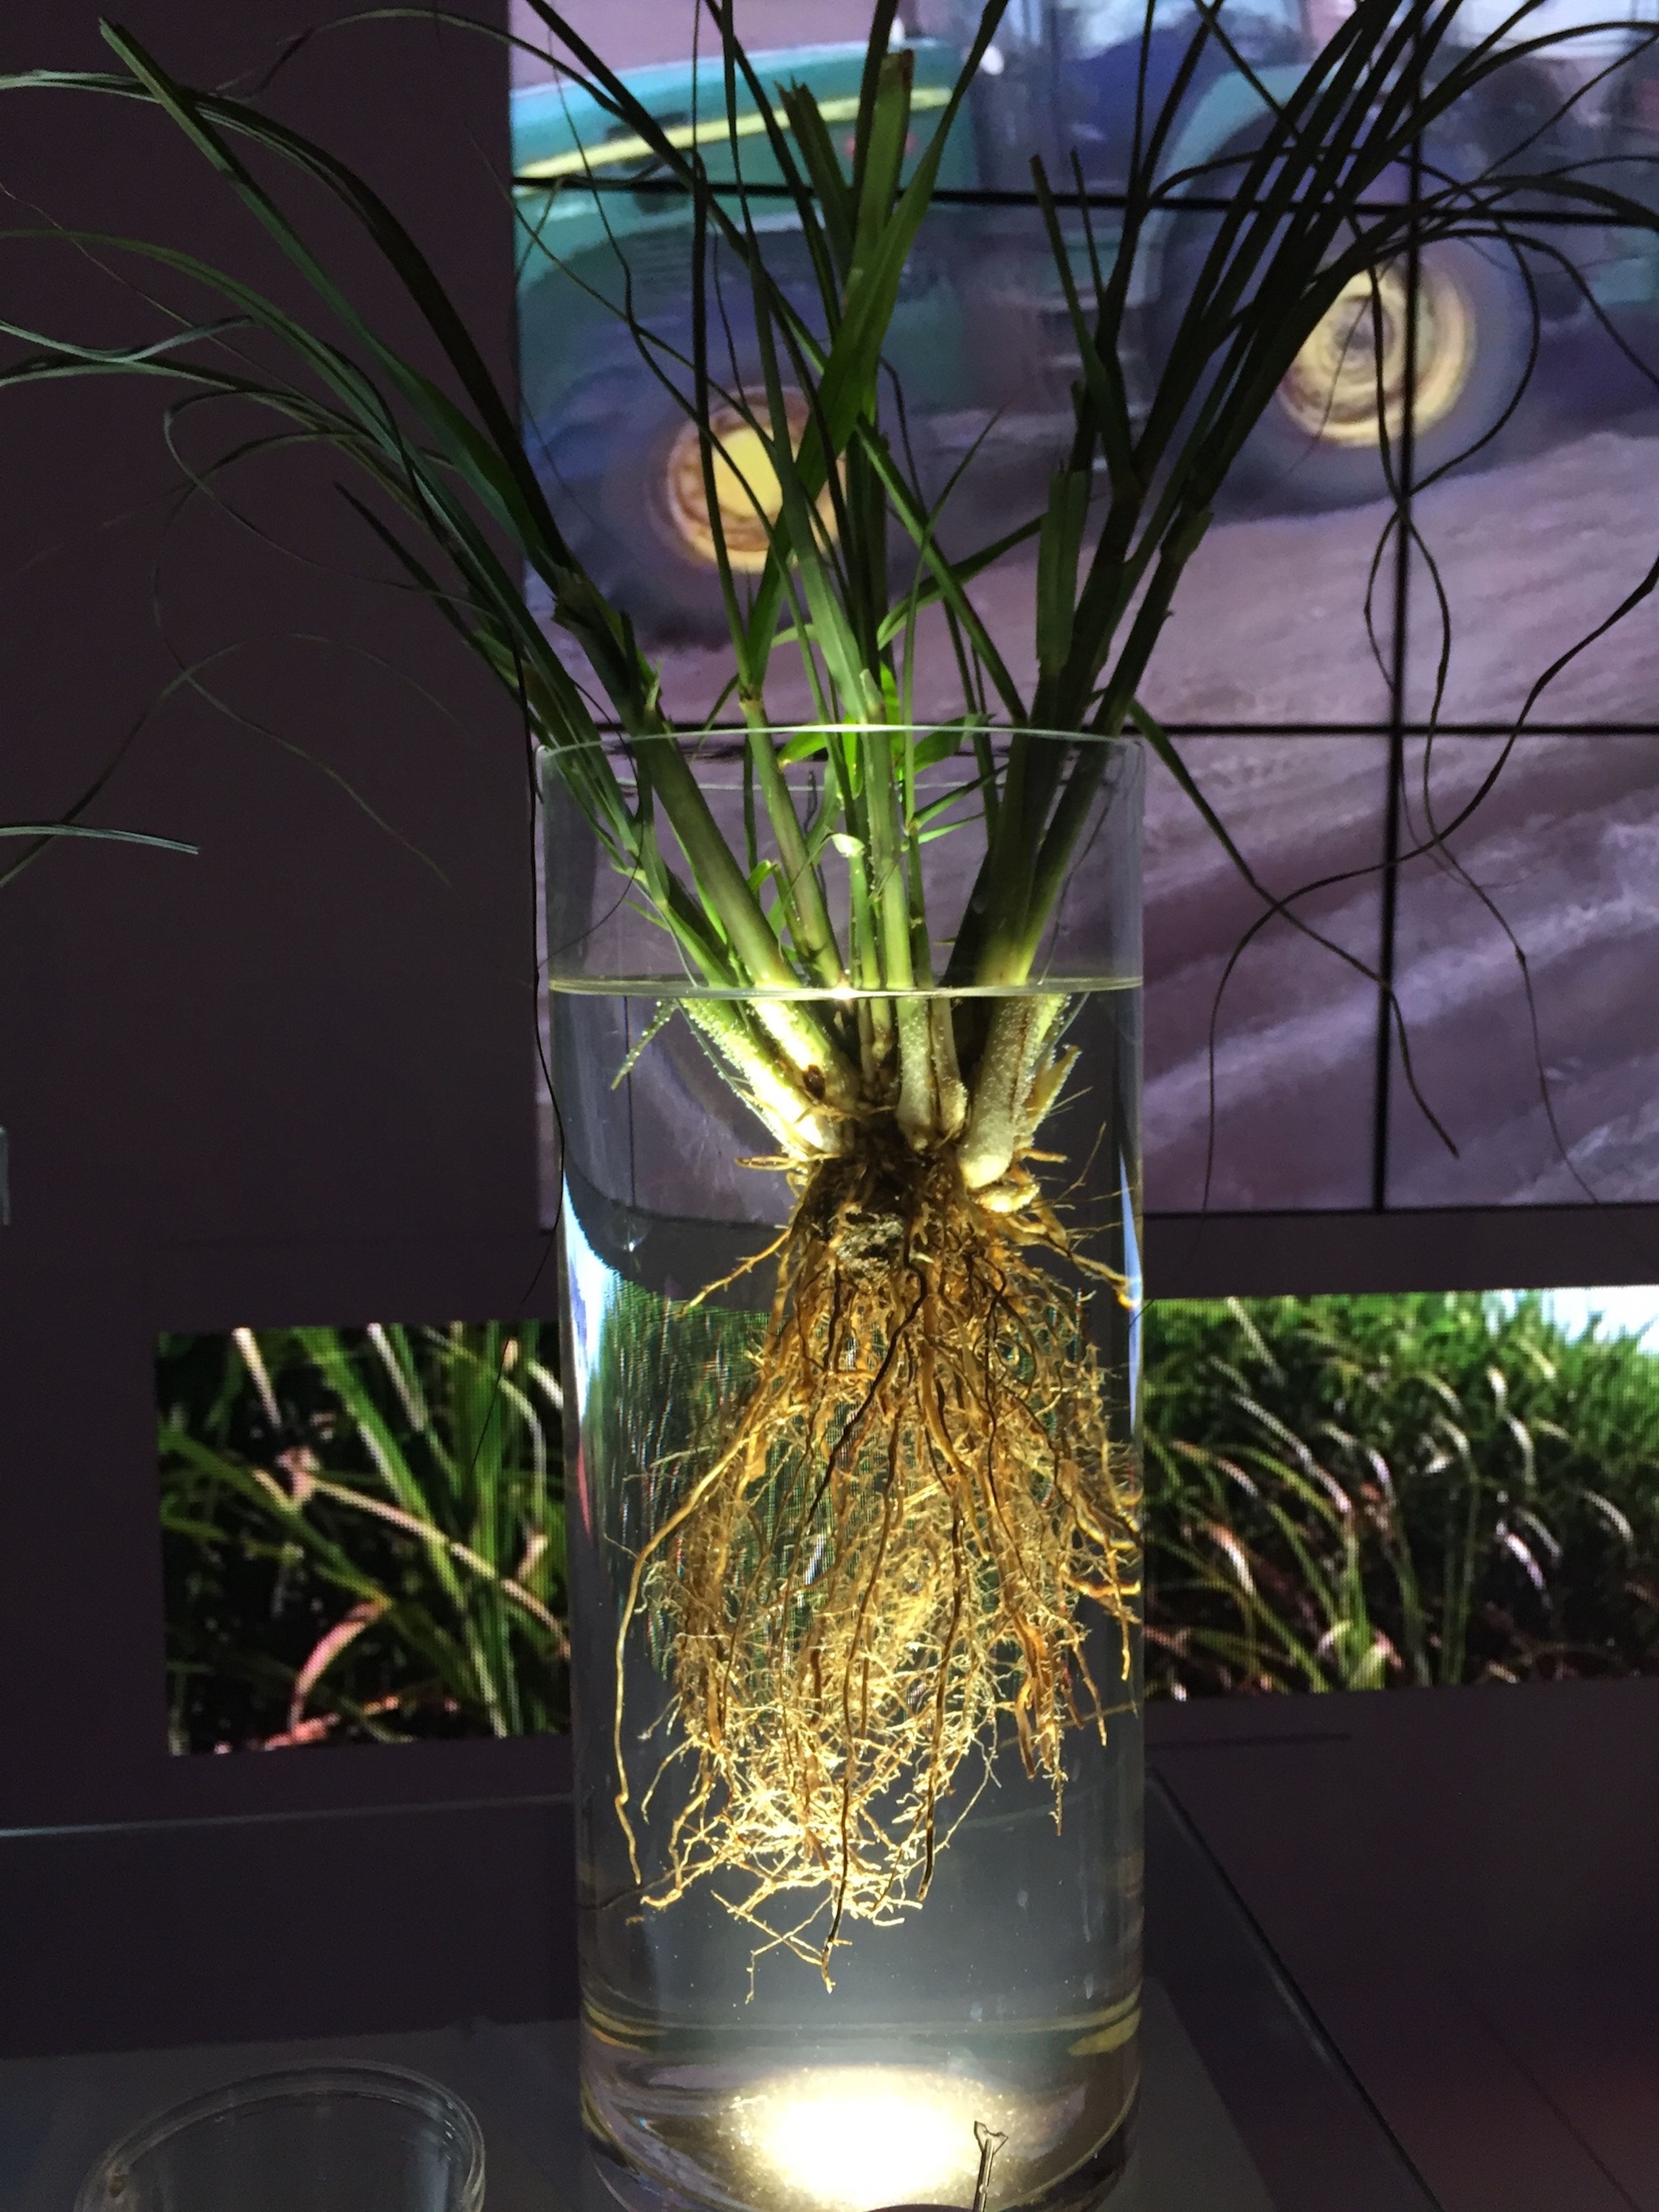 A bundle of young sugarcane in a cylindrical vase of water, up-lit from the bottom, putting the roots on display. A video clip showing a tractor is in the background.